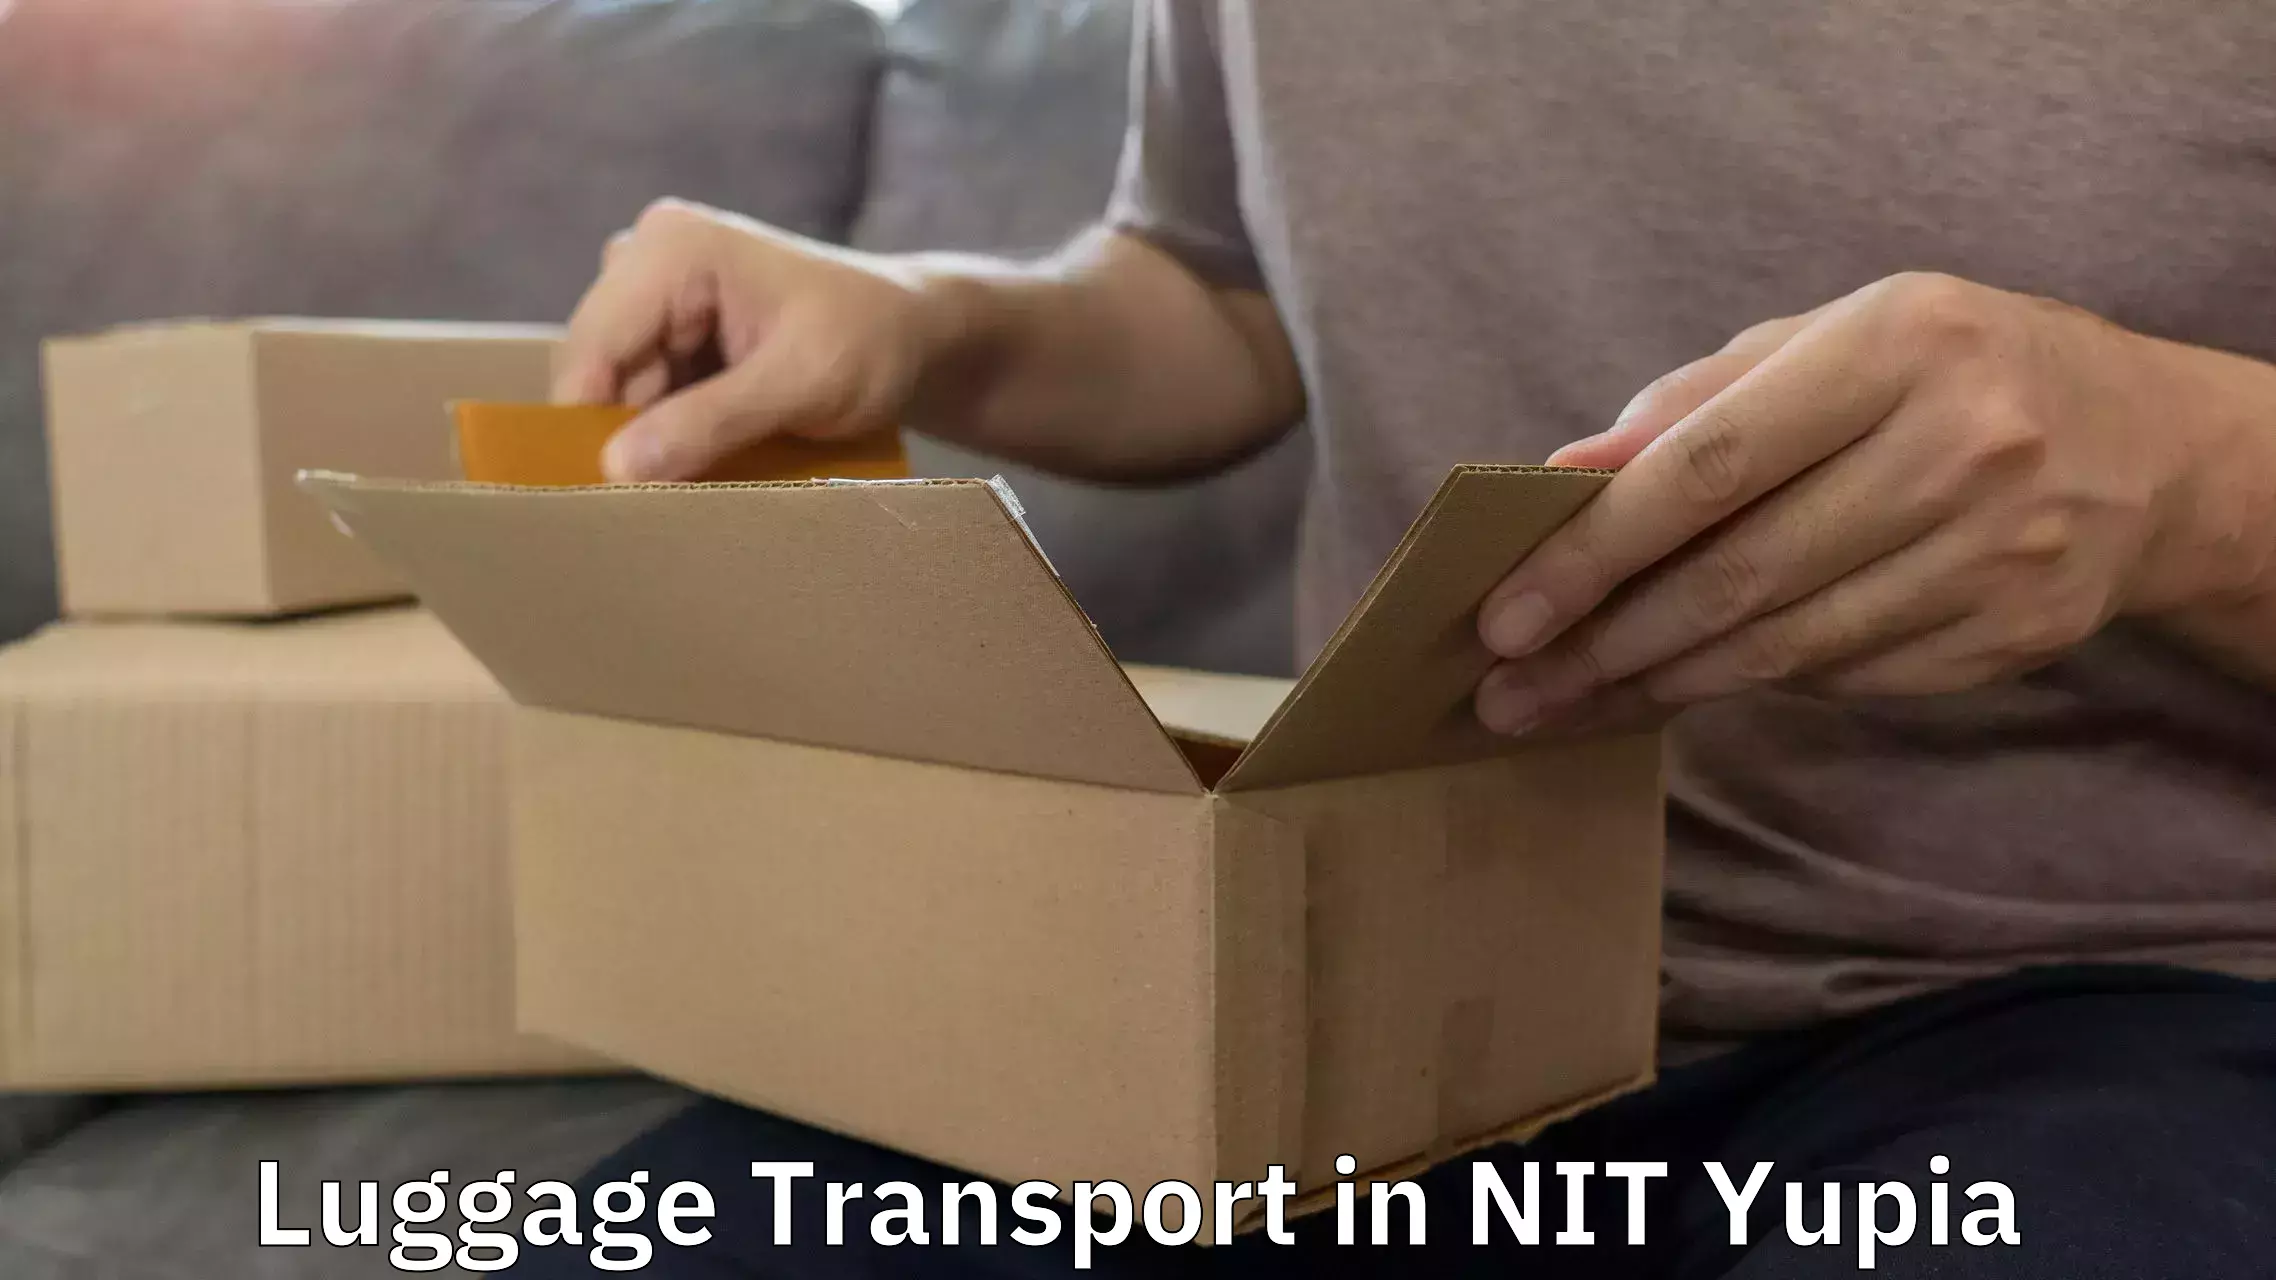 Doorstep luggage collection in NIT Yupia